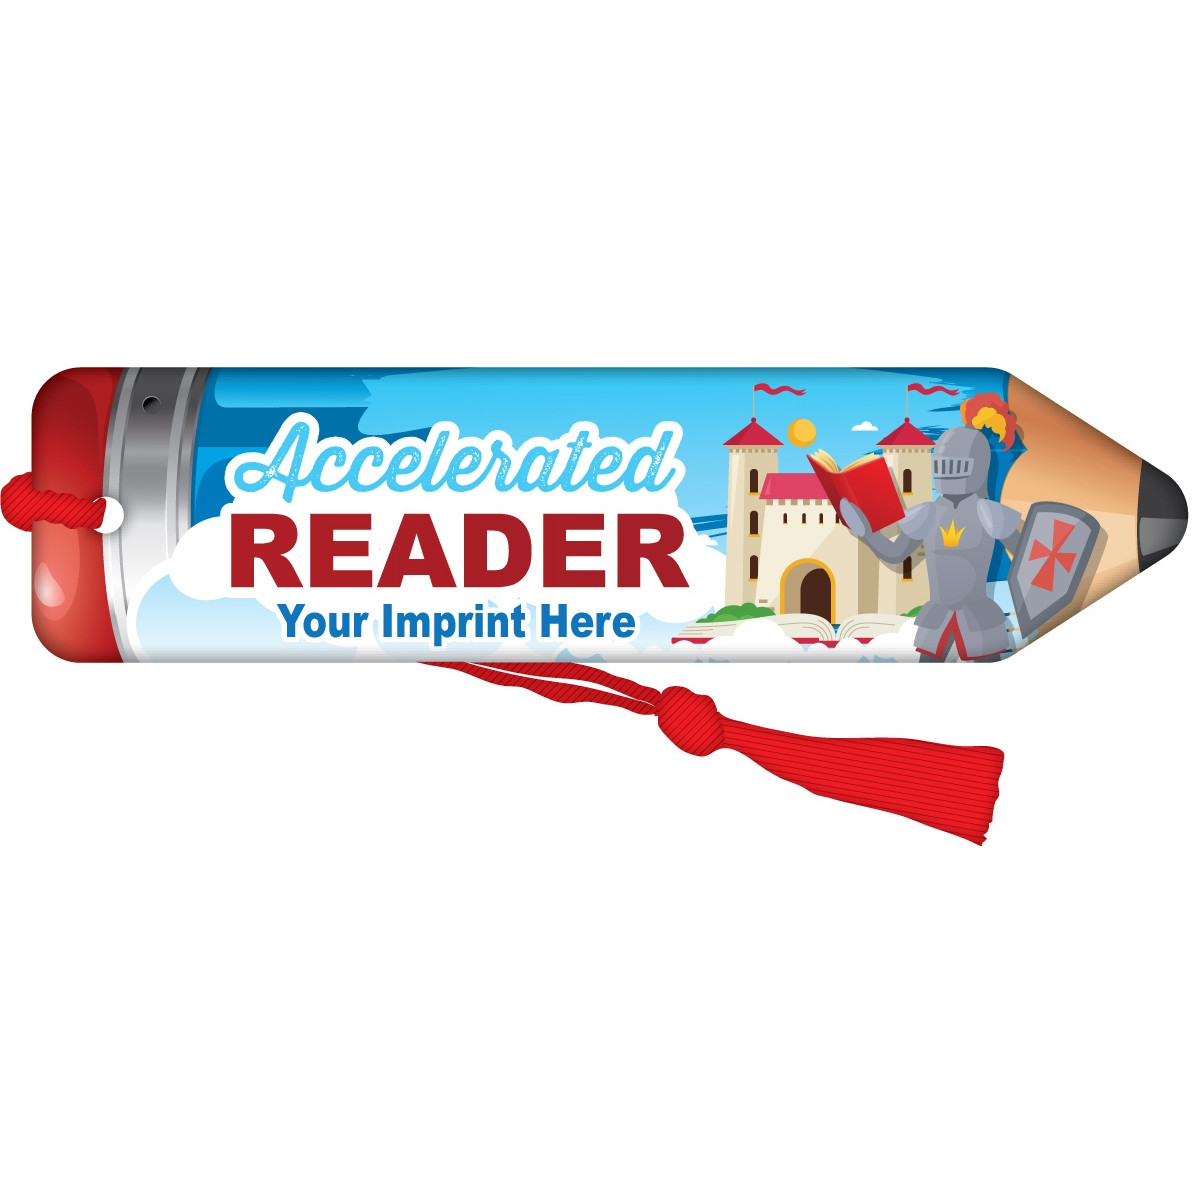 Custom Pencil Bookmark with Red Tassel - Accelerated Reader (Castle)